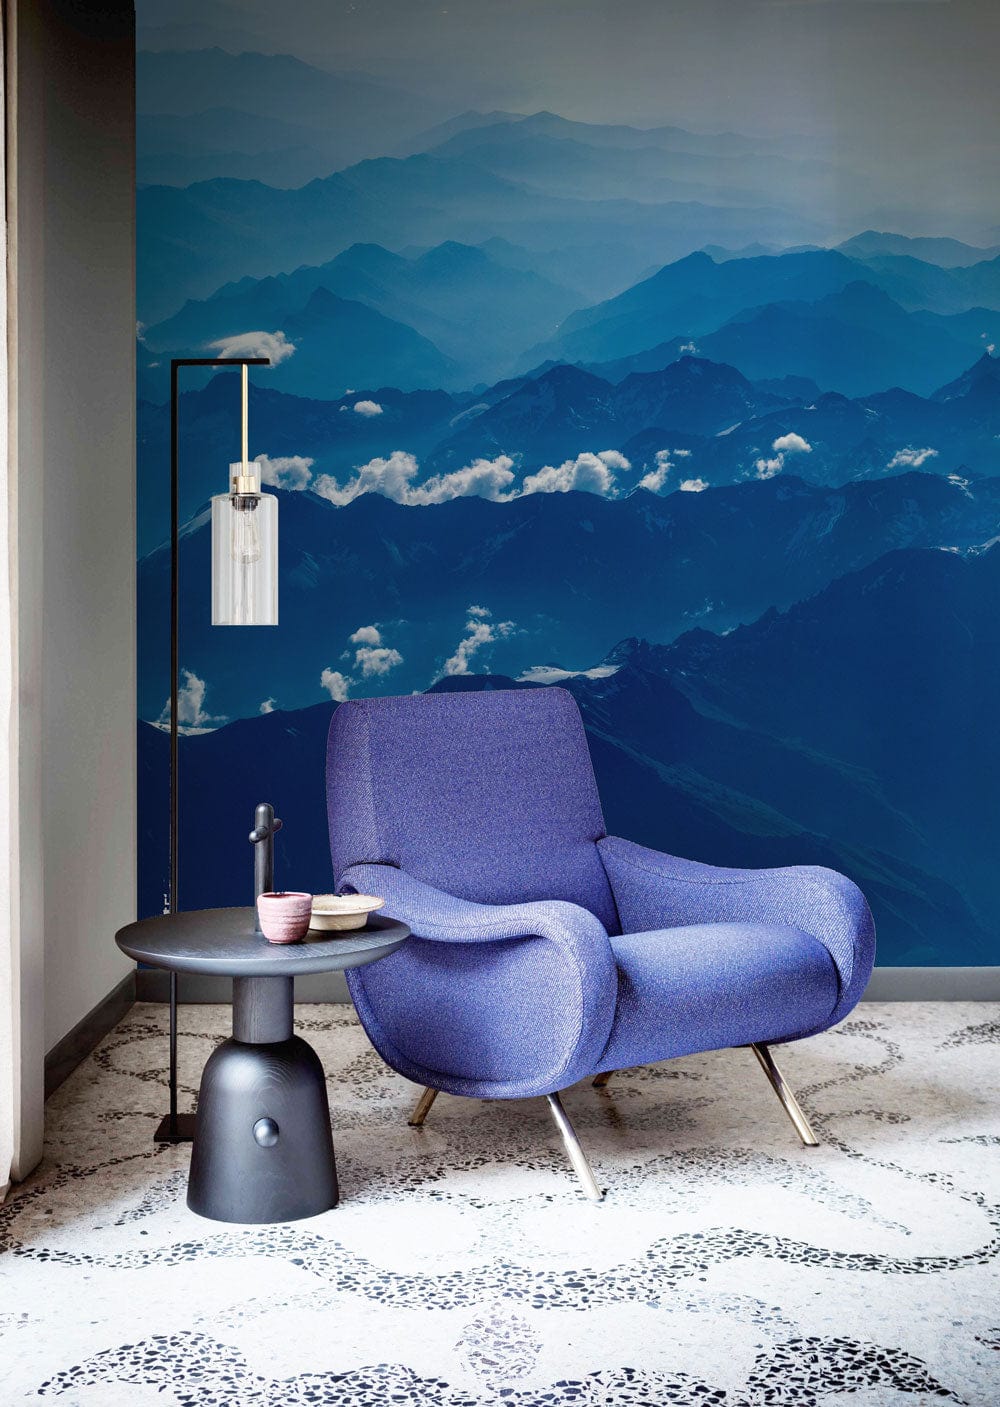 Wallpaper mural featuring a scene of dark blue mountains for use in decorating the hallway